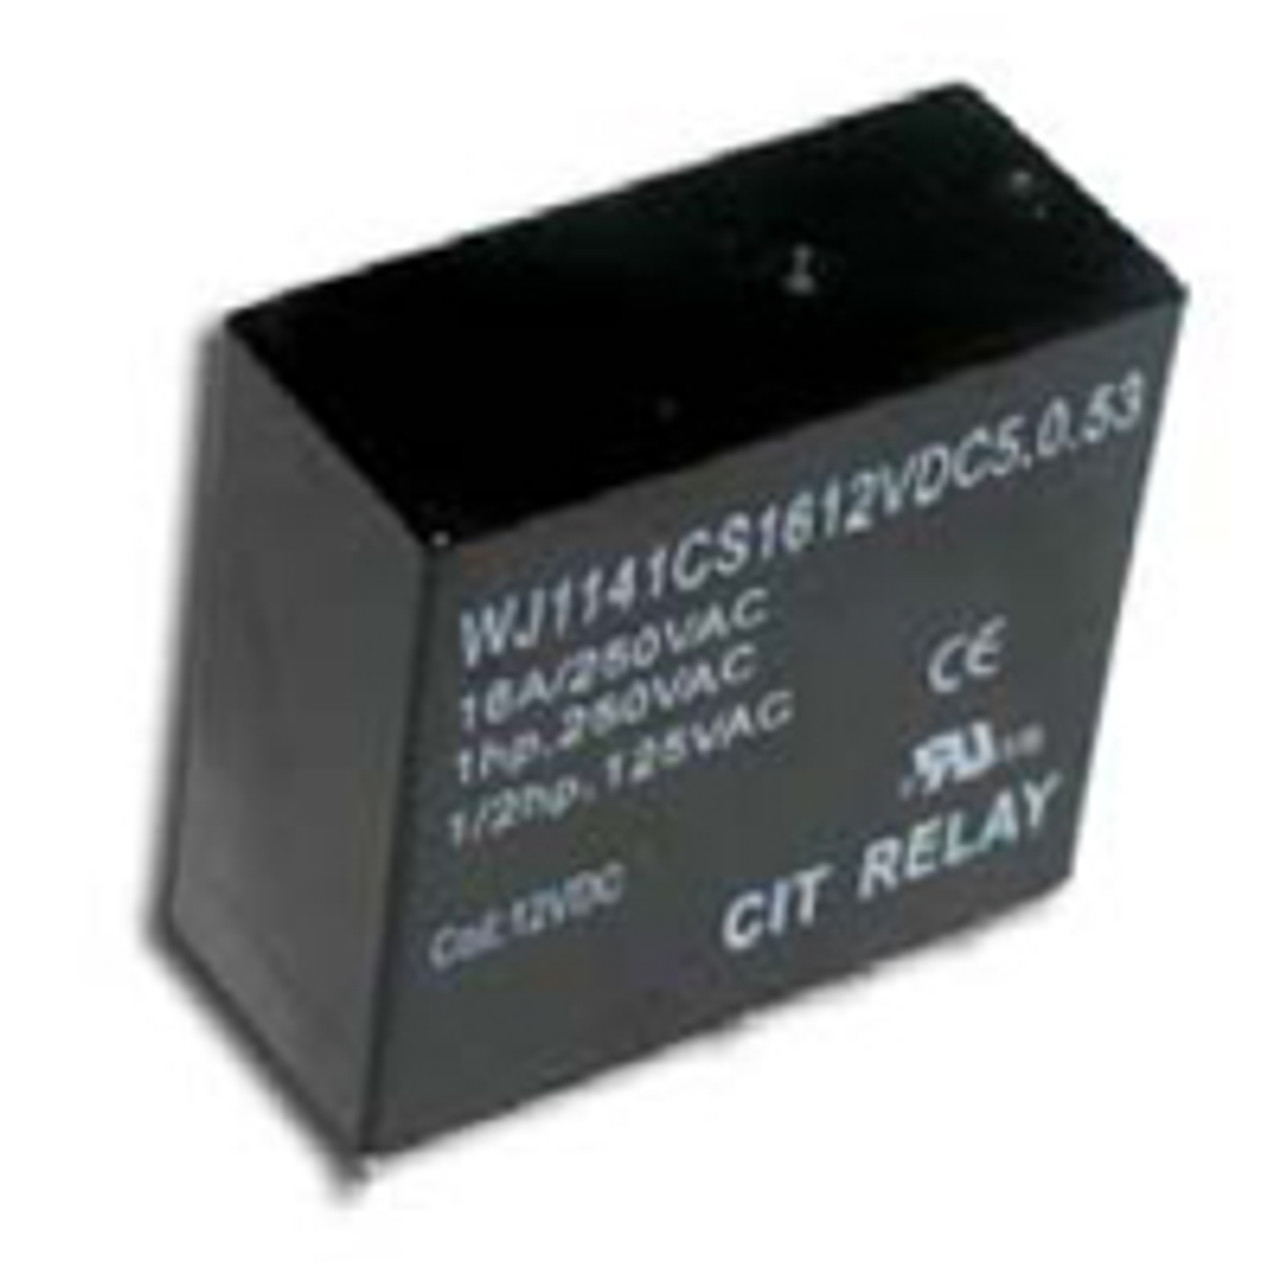 CIT Relay and Switch J1141AS1024VDC3.5.53 Power Relays